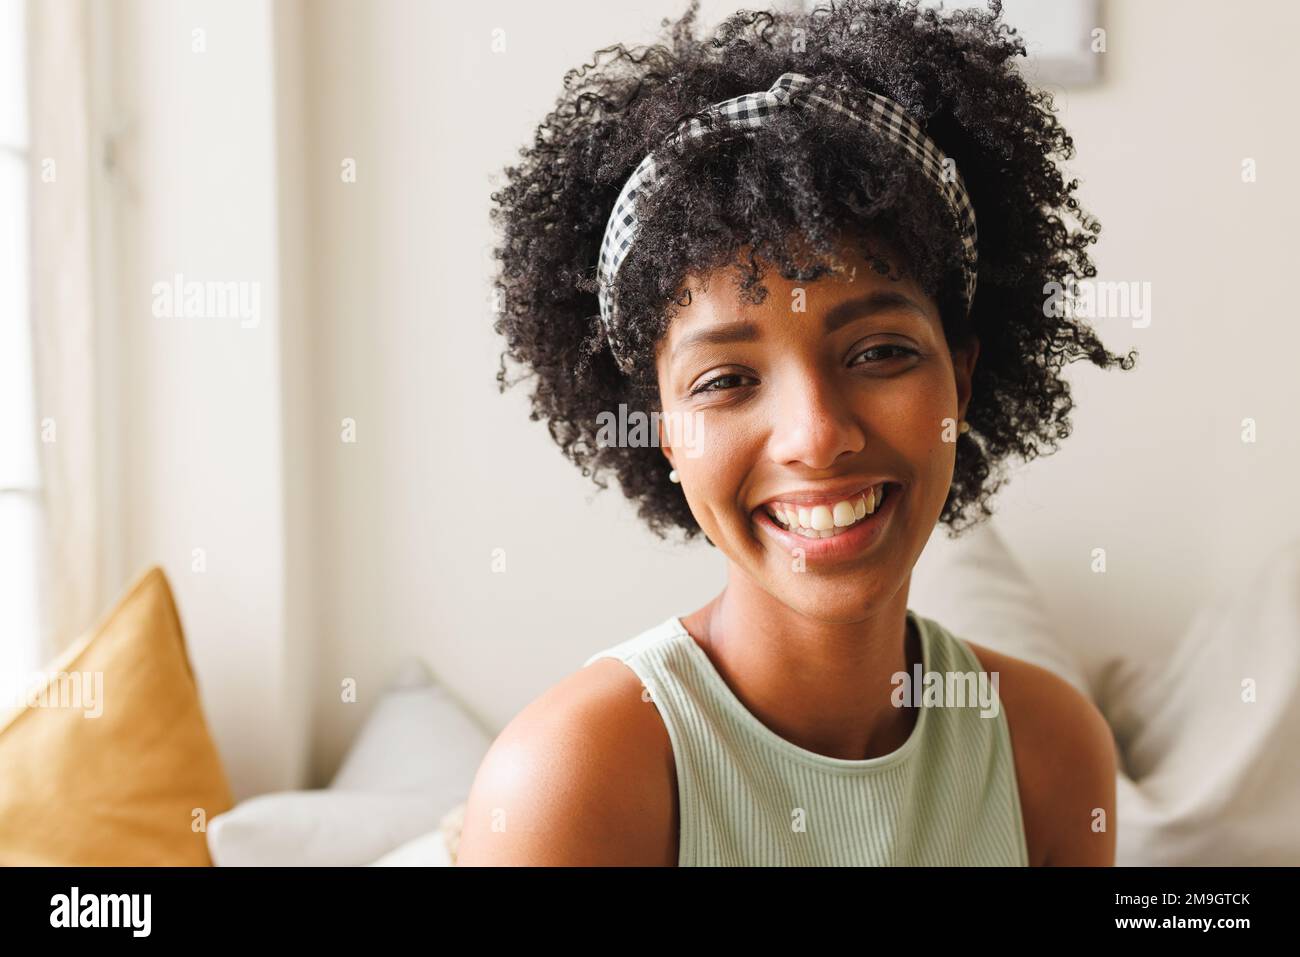 Close-up portrait of beautiful biracial smiling young woman with afro hair against wall at home Stock Photo